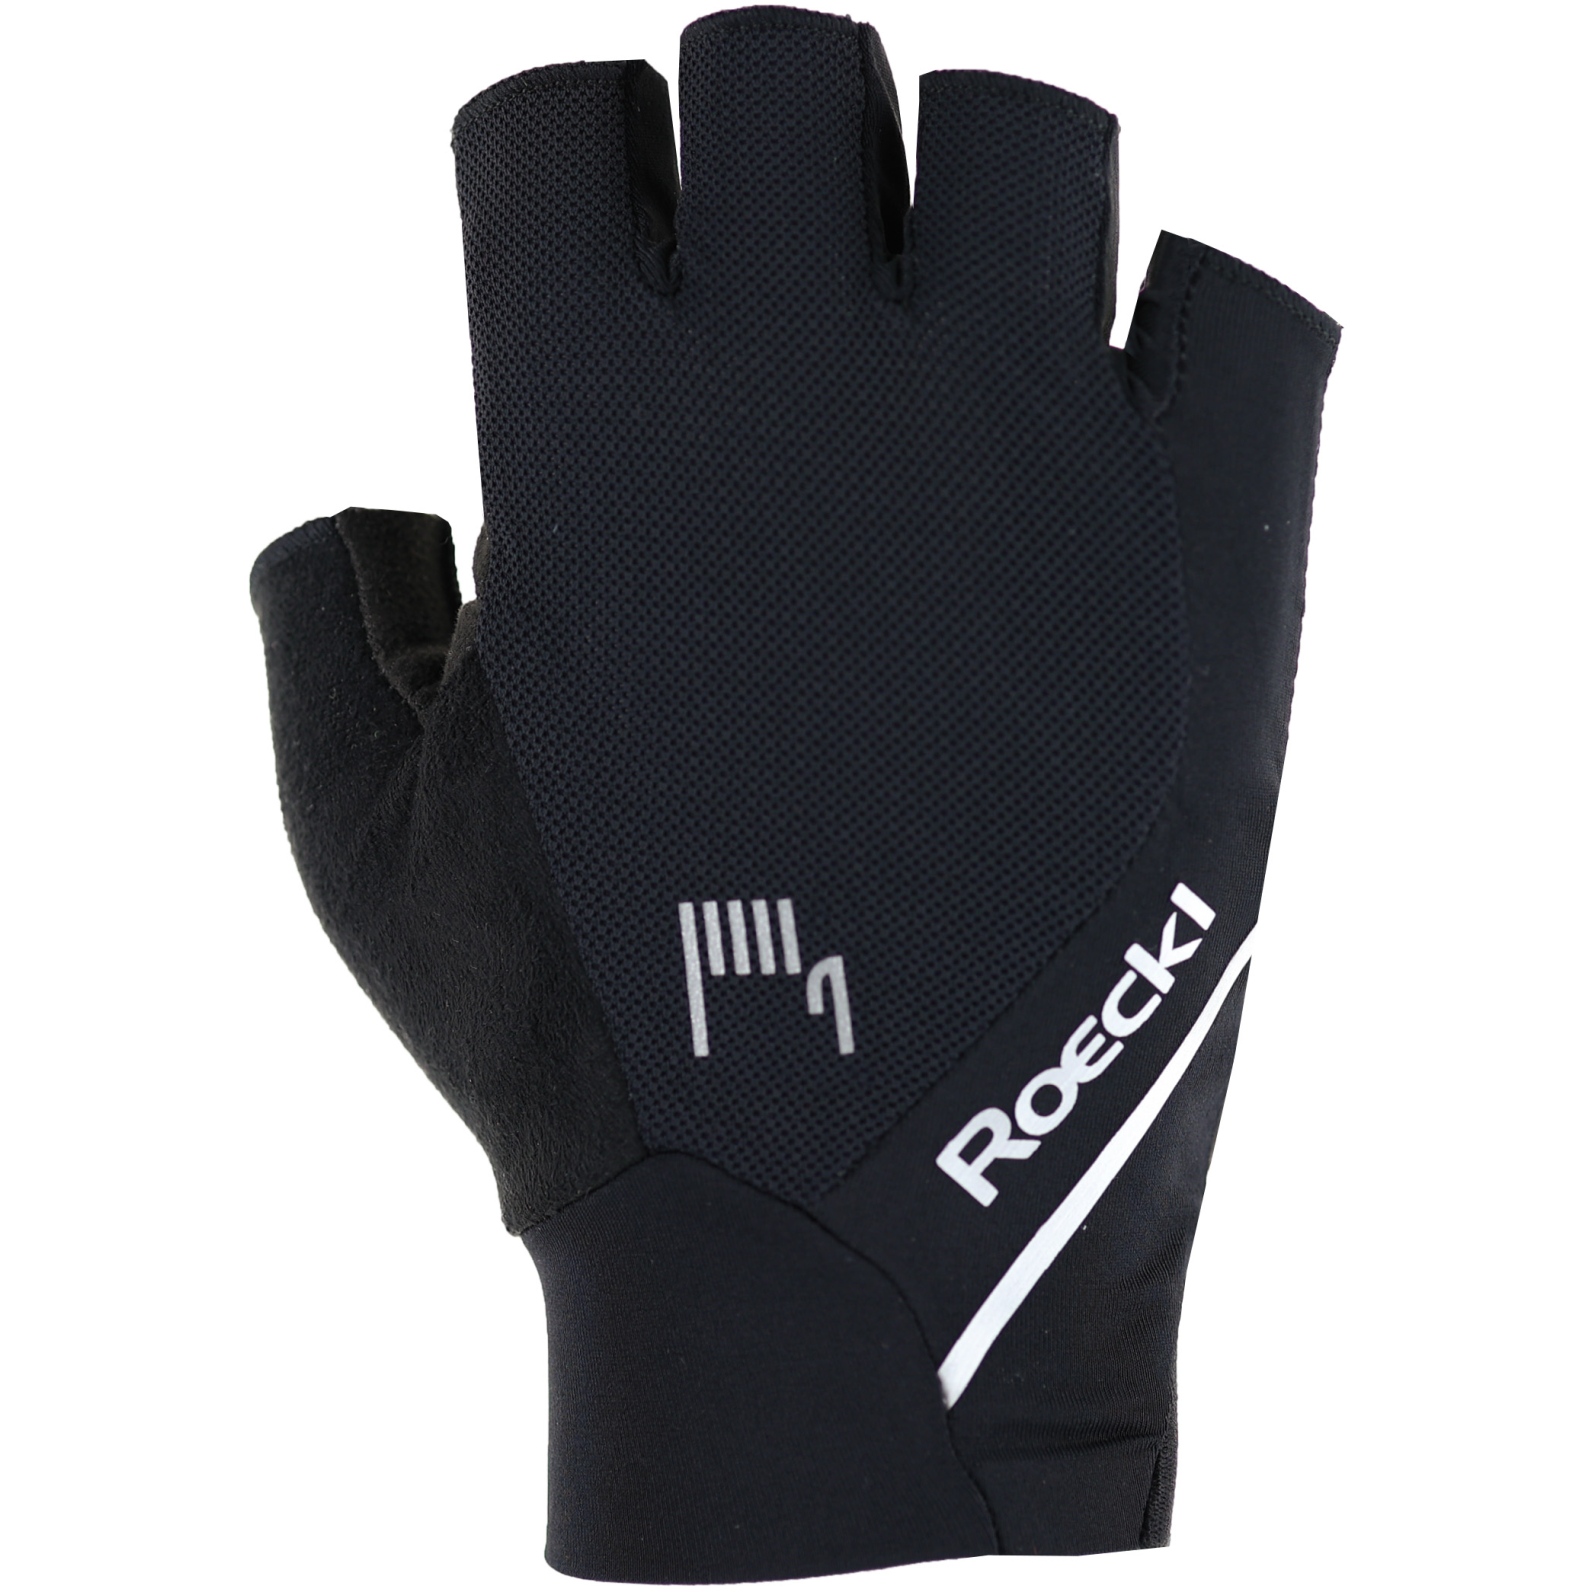 Picture of Roeckl Sports Ivory 2 Cycling Gloves - black 9000